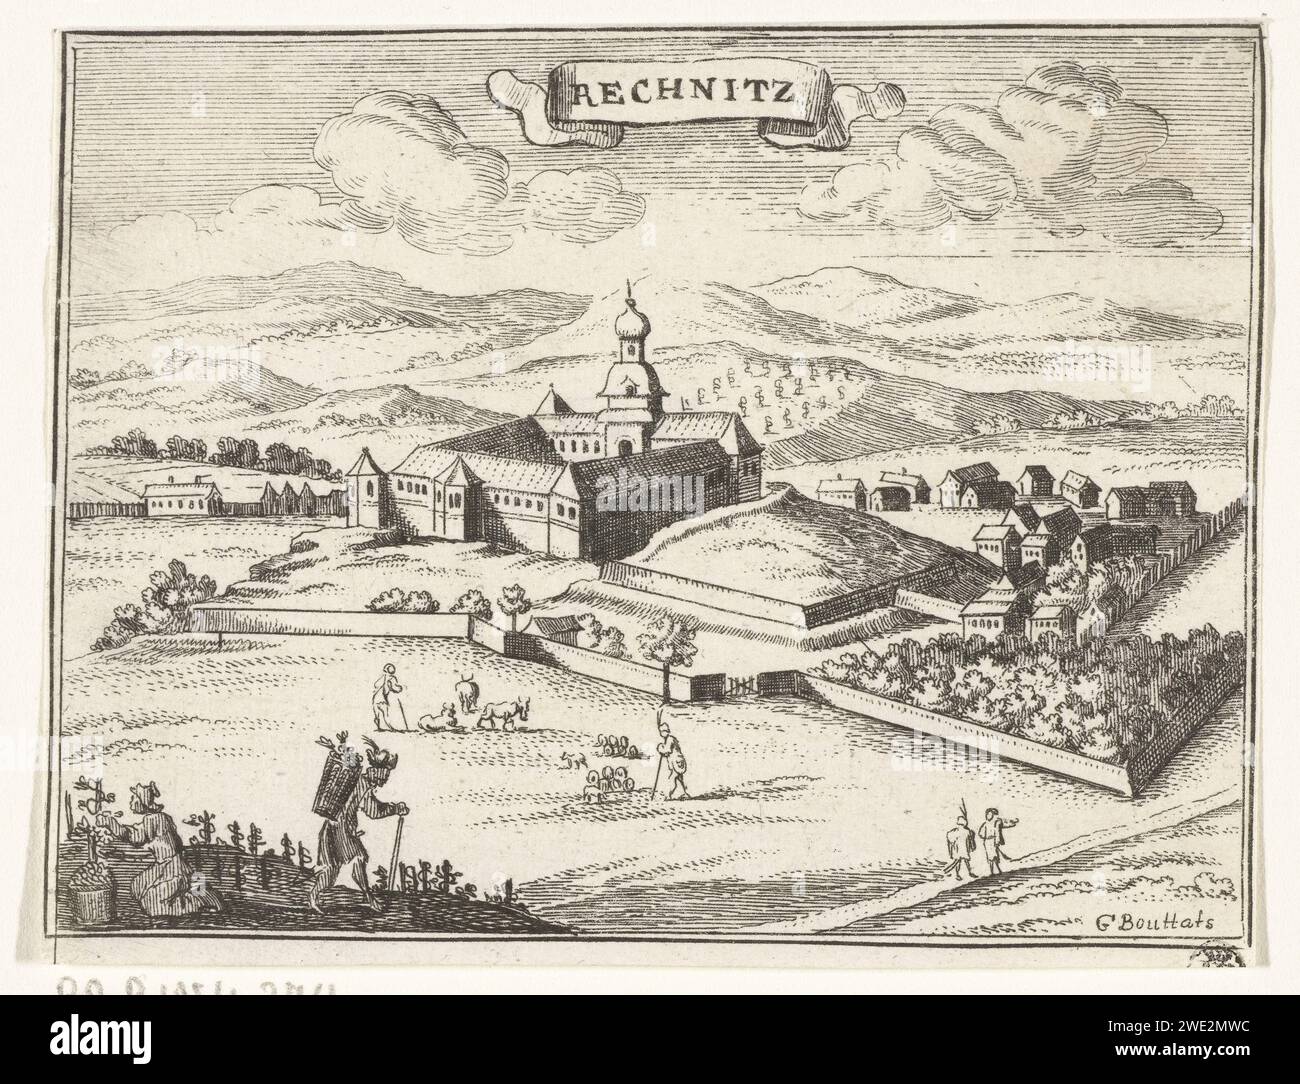 View of ReChneritz, Gaspar Bouttats, 1686 print View of the city of Rechnitz. In the foreground, outside the city walls, grapes are at work. A cartouche with the name of the city above the cityscape. Antwerp paper etching prospect of city, town panorama, silhouette of city Rechnitz Stock Photo